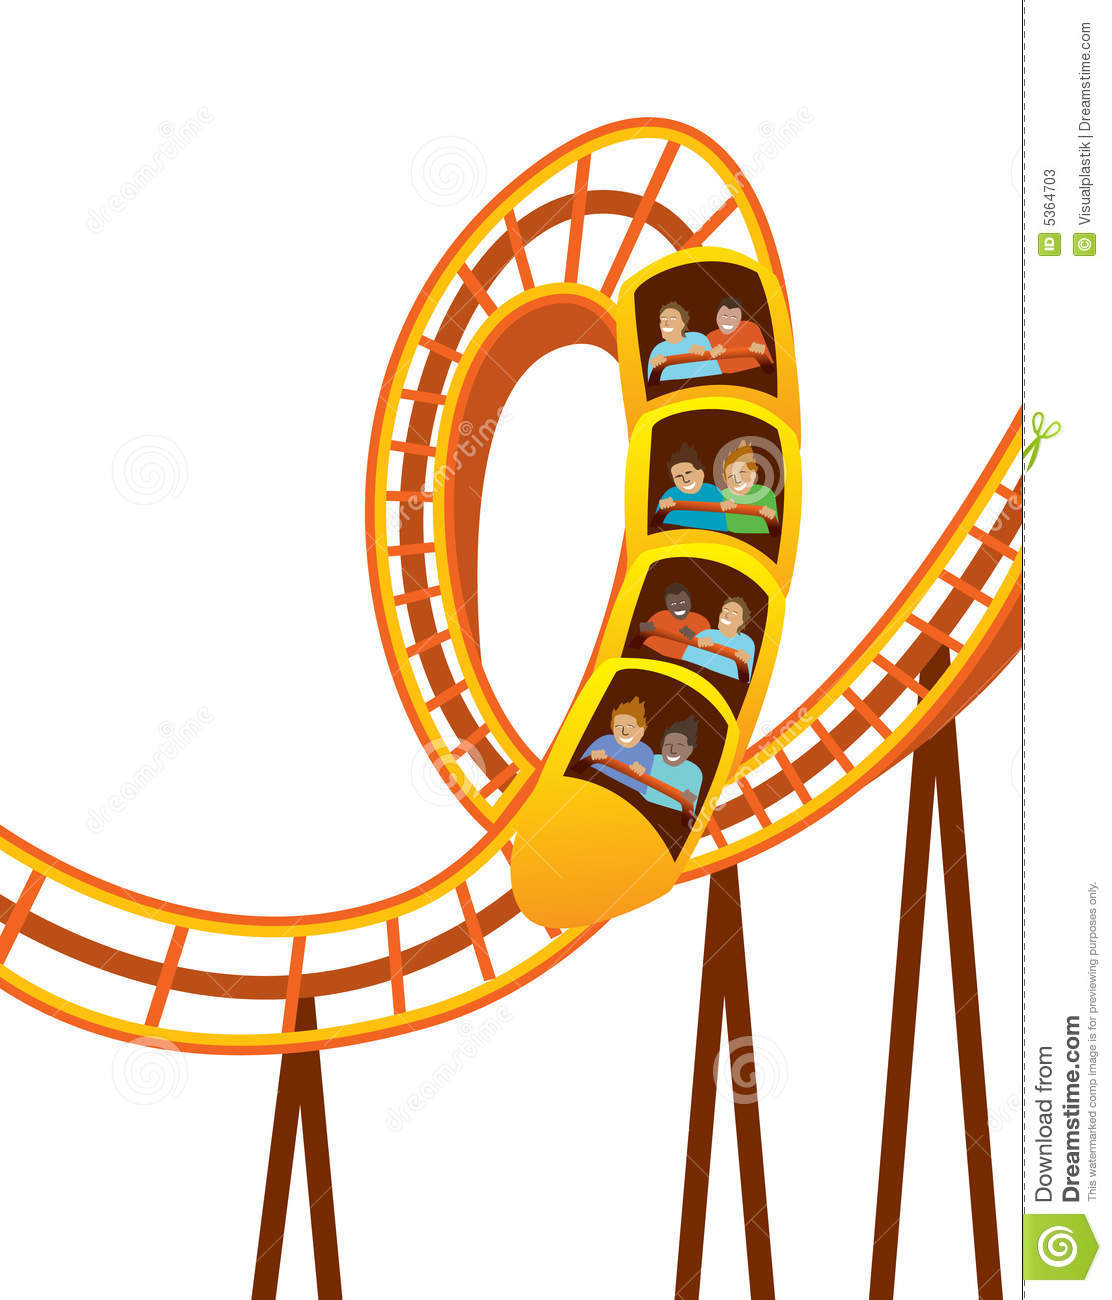 Roller coaster clipart 3. Rol